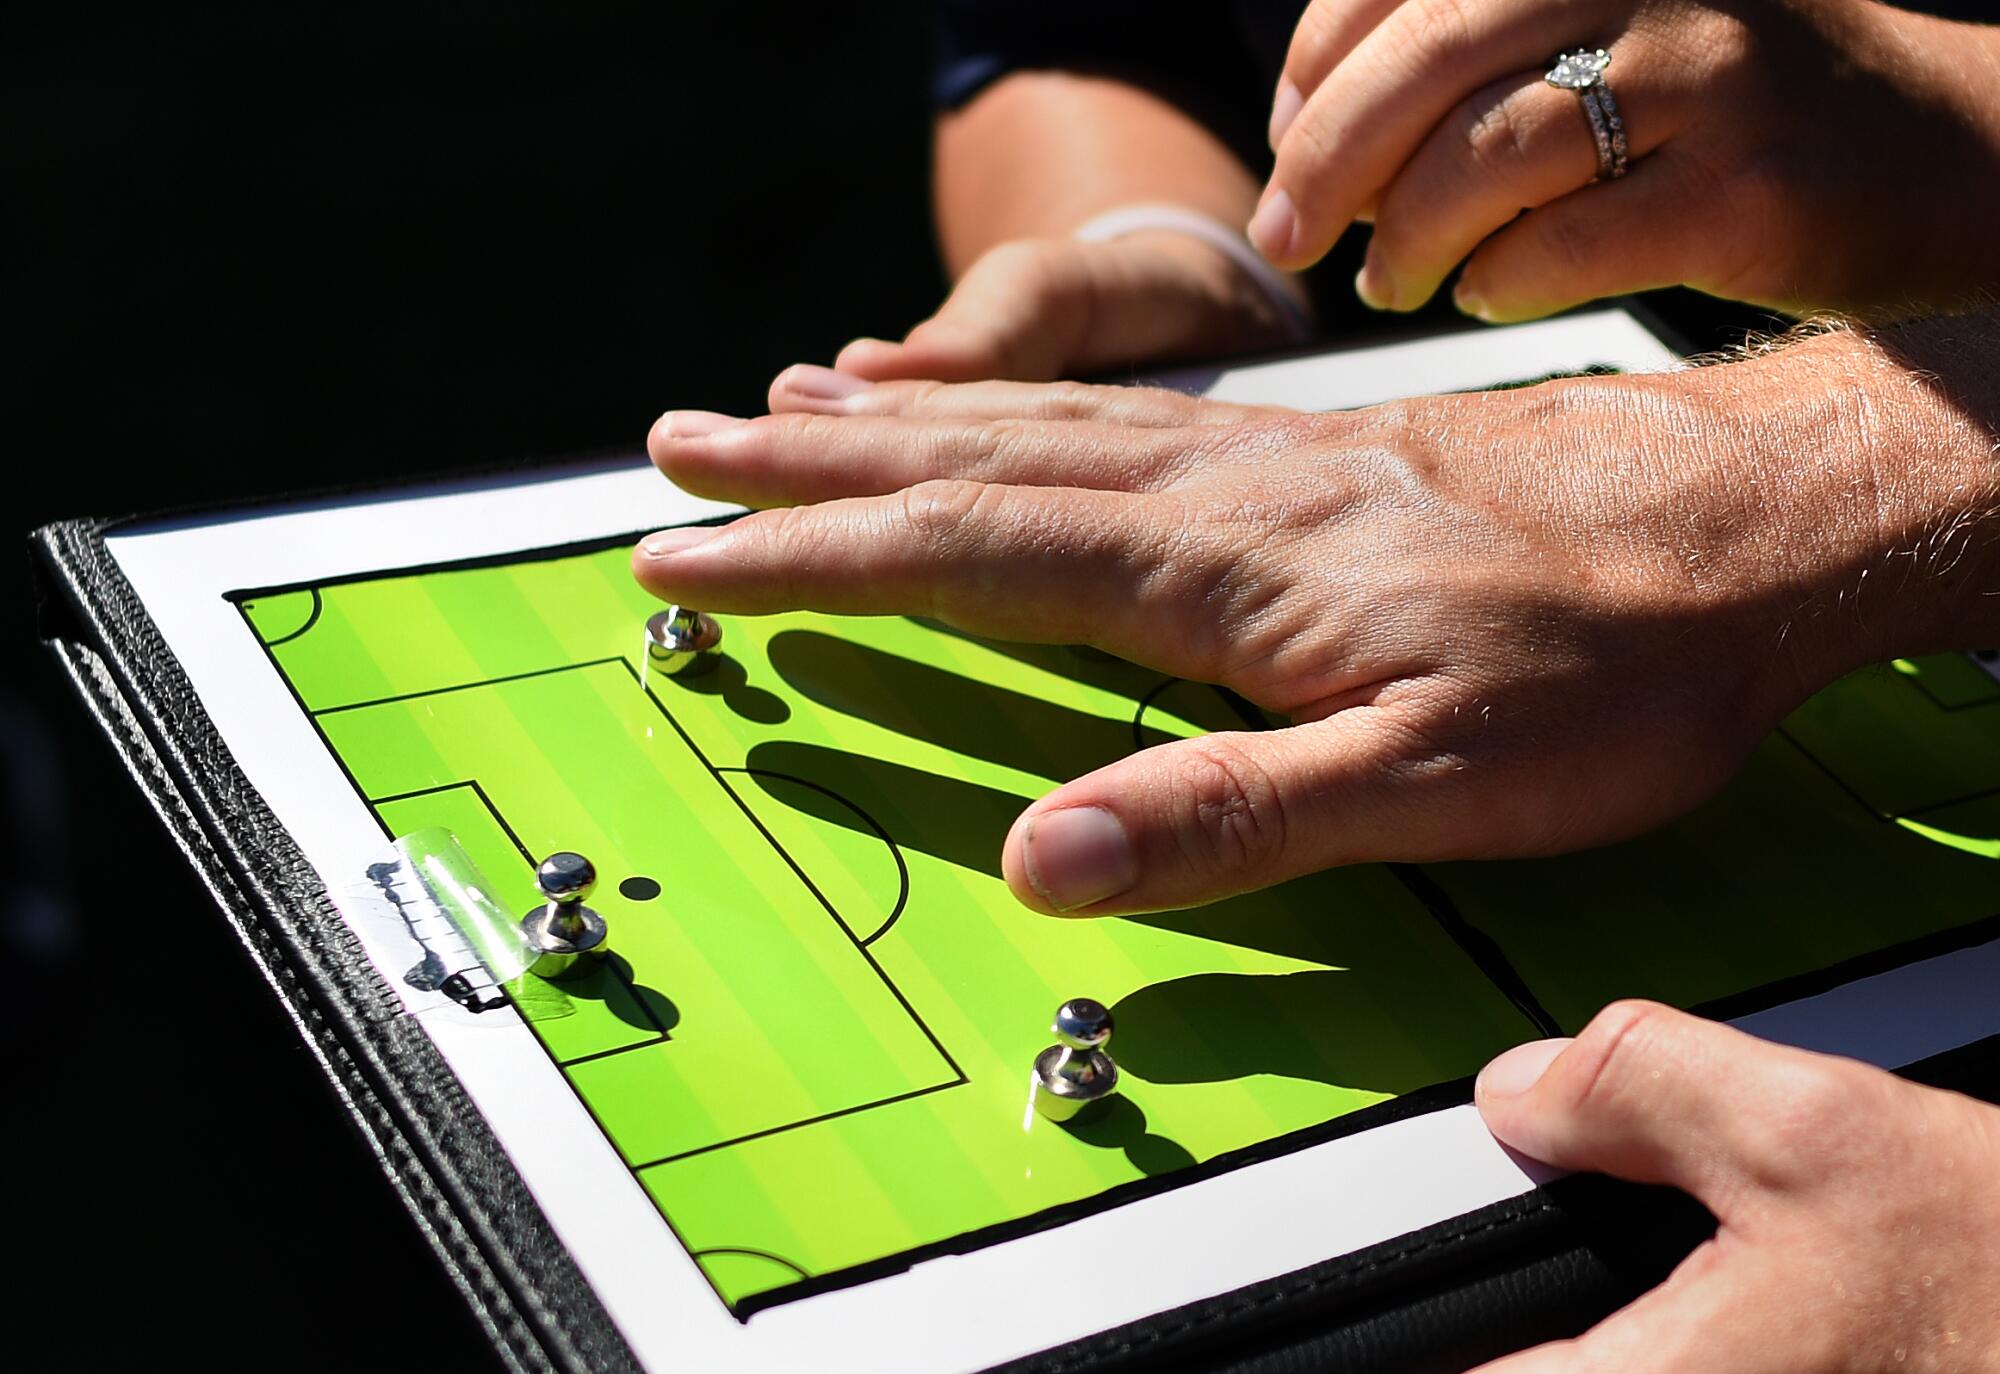 Blind soccer players feel the tactile board during a recent scrimmage at Salt Creek Park in Chula Vista.